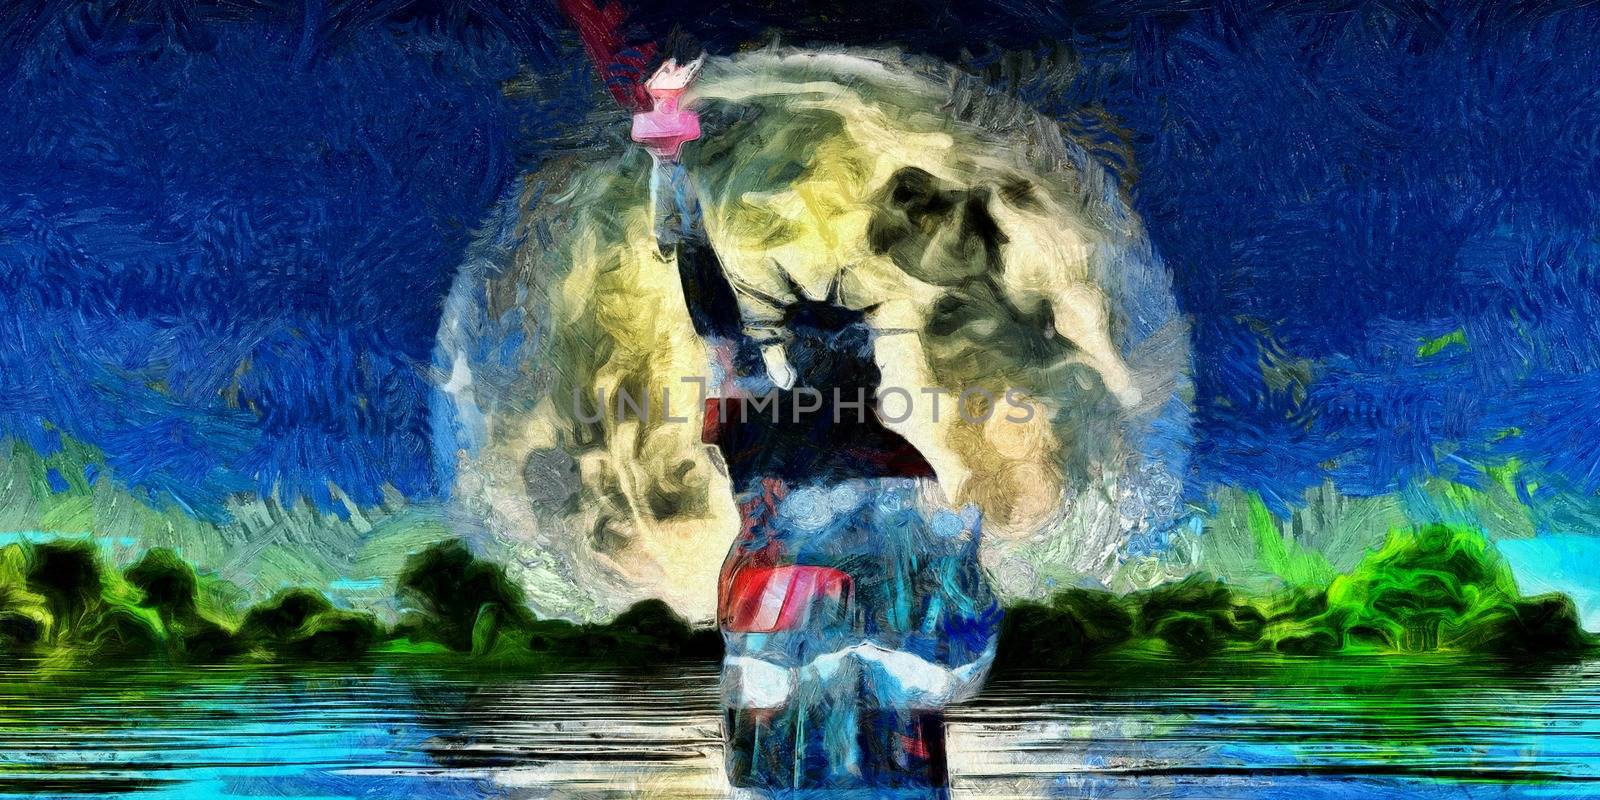 Statue of Liberty by applesstock